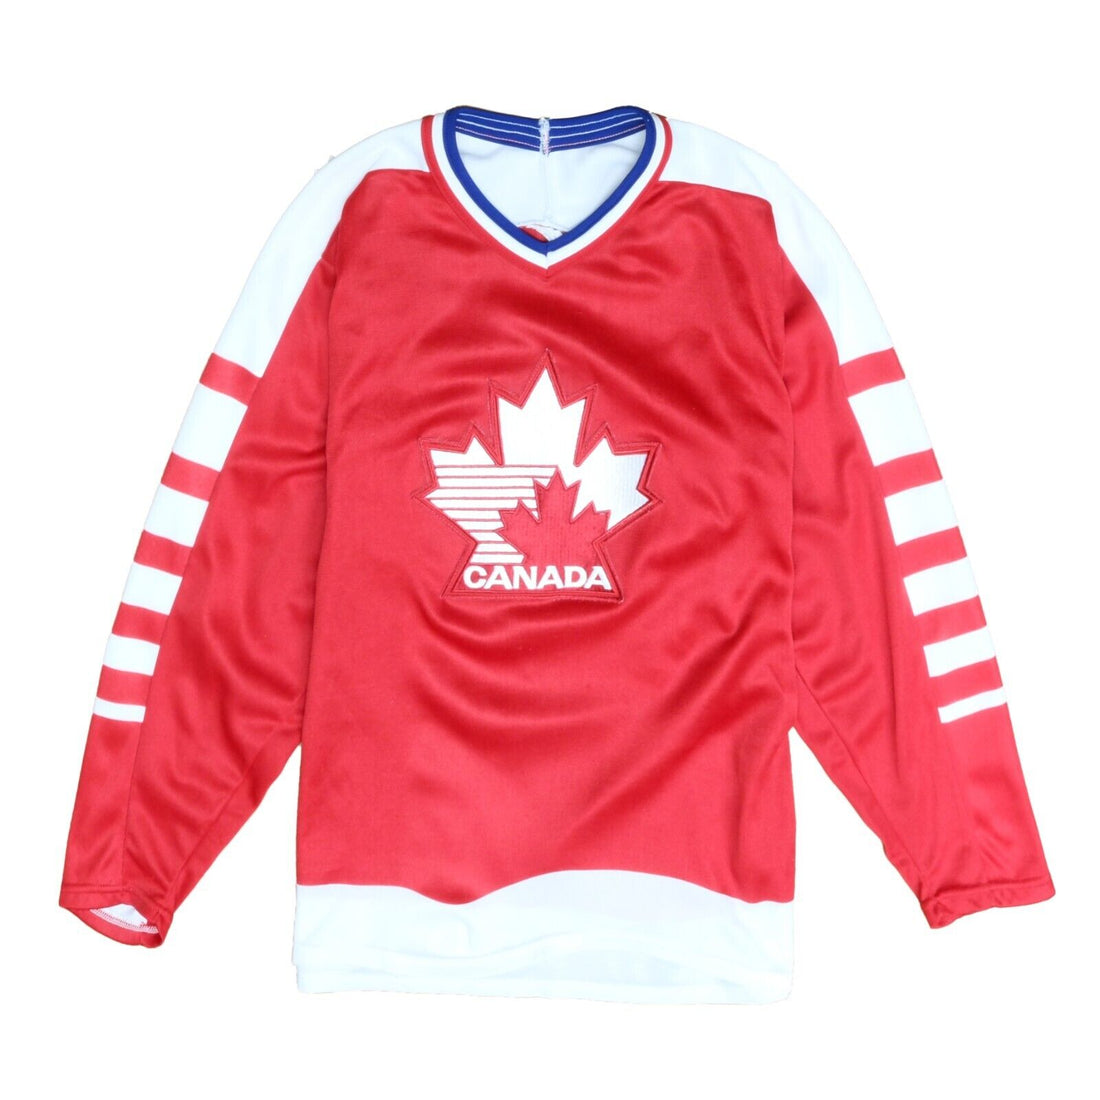 Vintage Team Canada Eric Lindros CCM Maska Hockey Jersey Size Small Red 90s